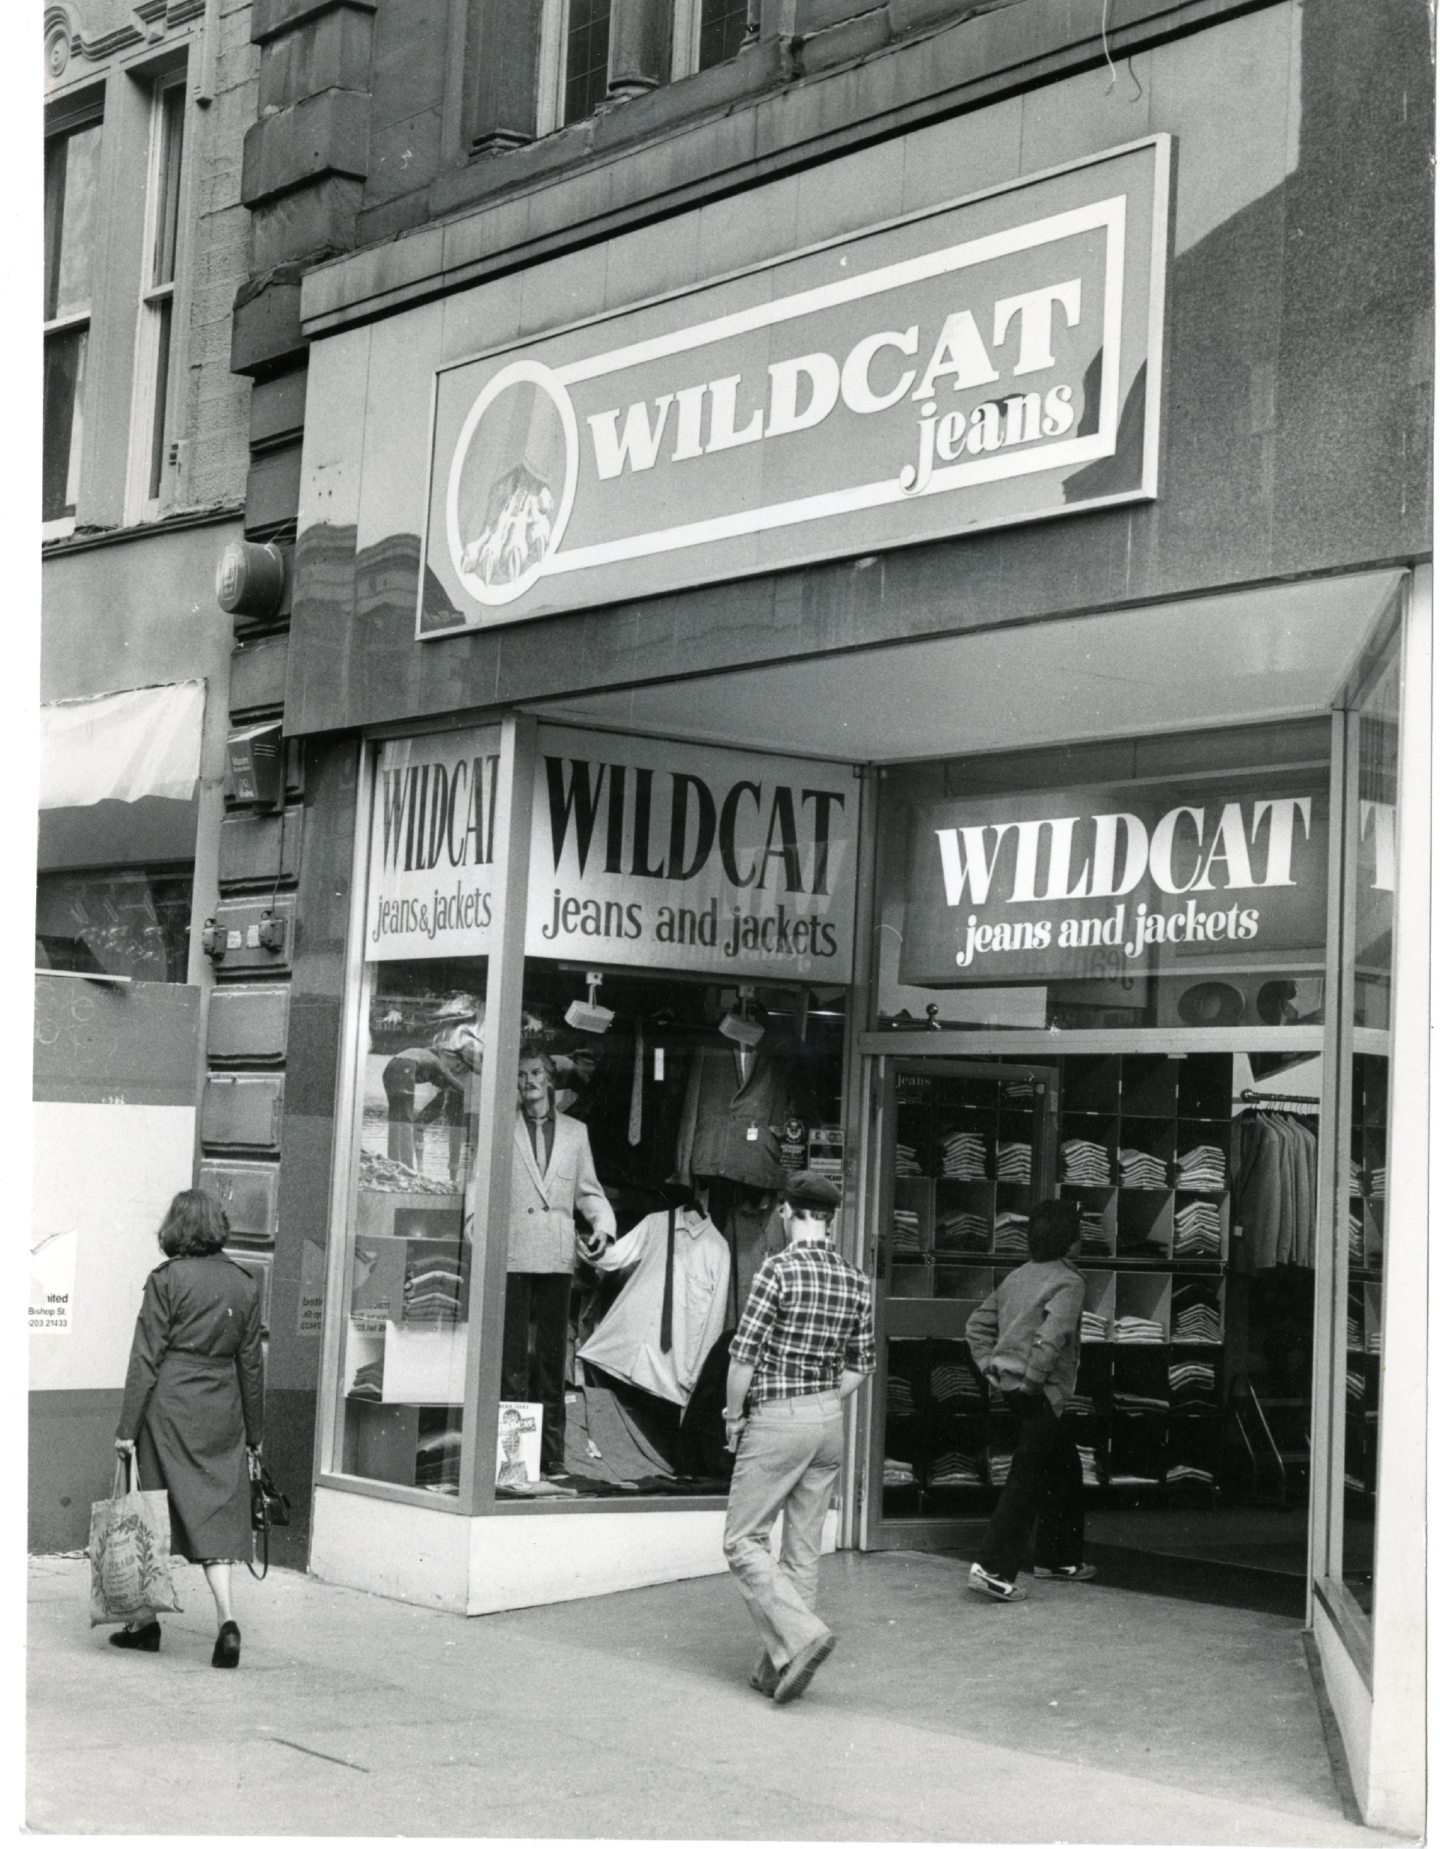 The Wildcat Jeans shop located in the Murraygate in 1979. Image: DC Thomson.